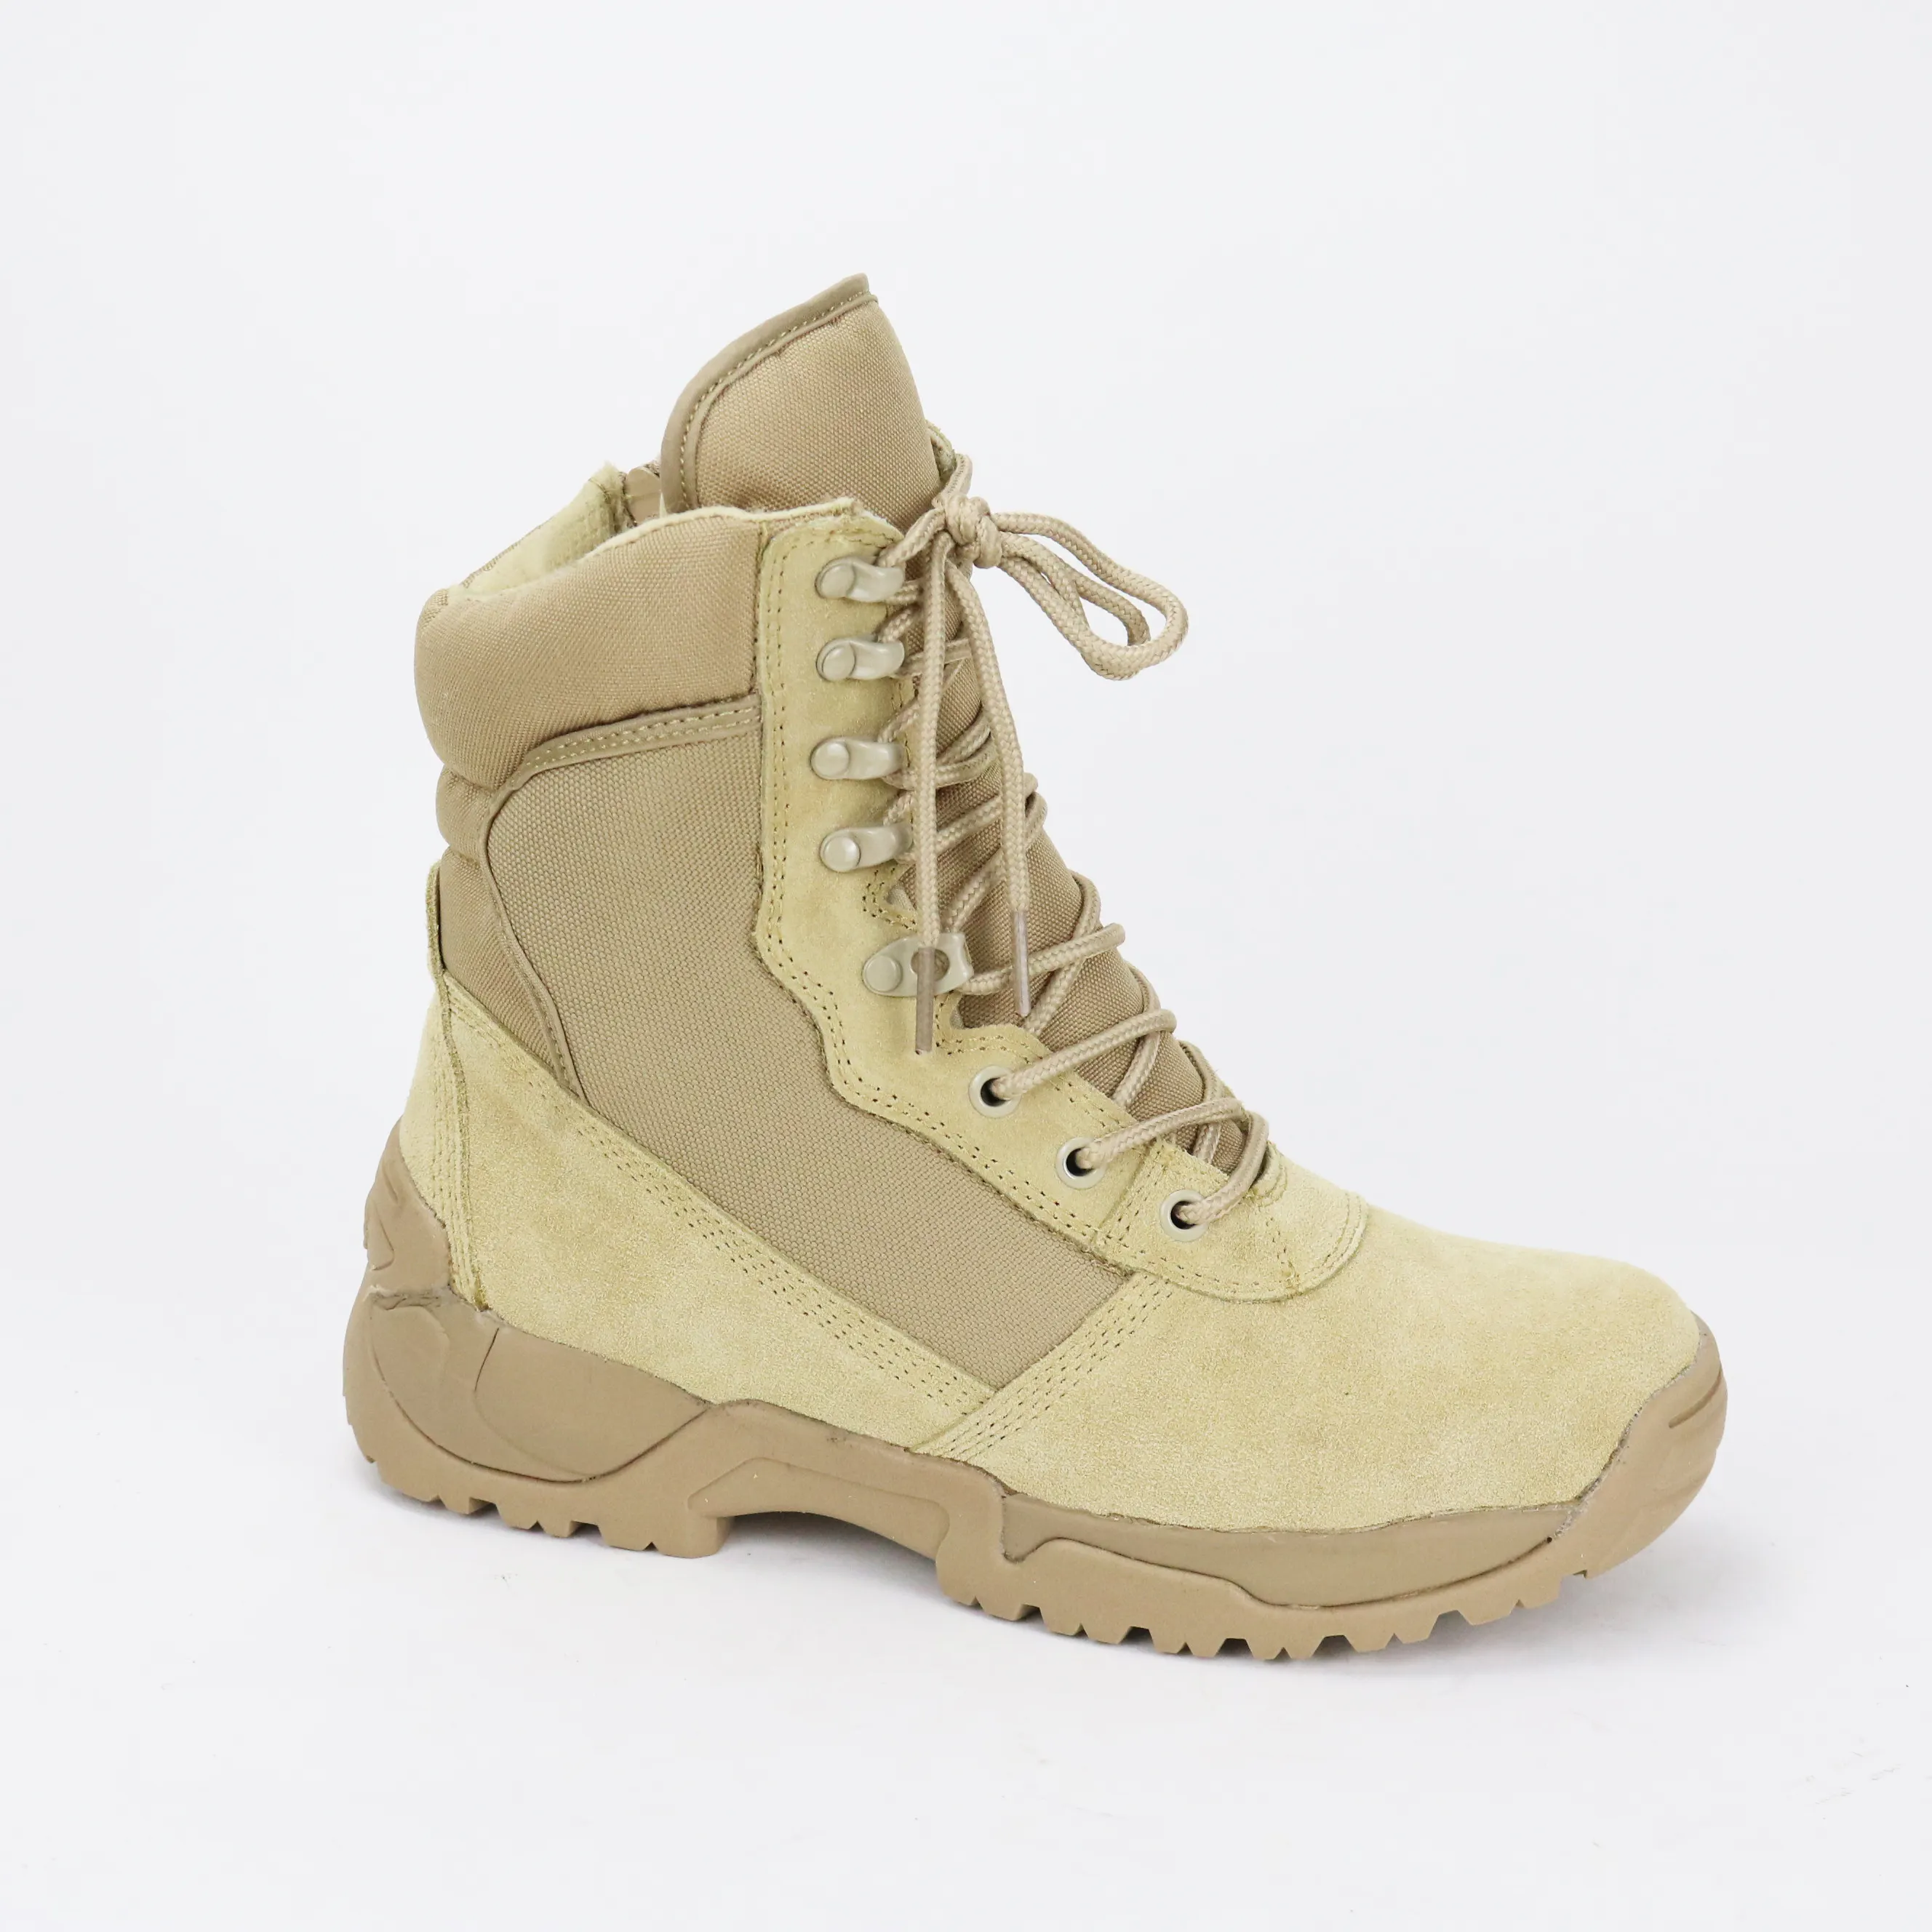 Comfortable Army boots Outdoor Hiking Work high quality breathable Industrial Safety shoes